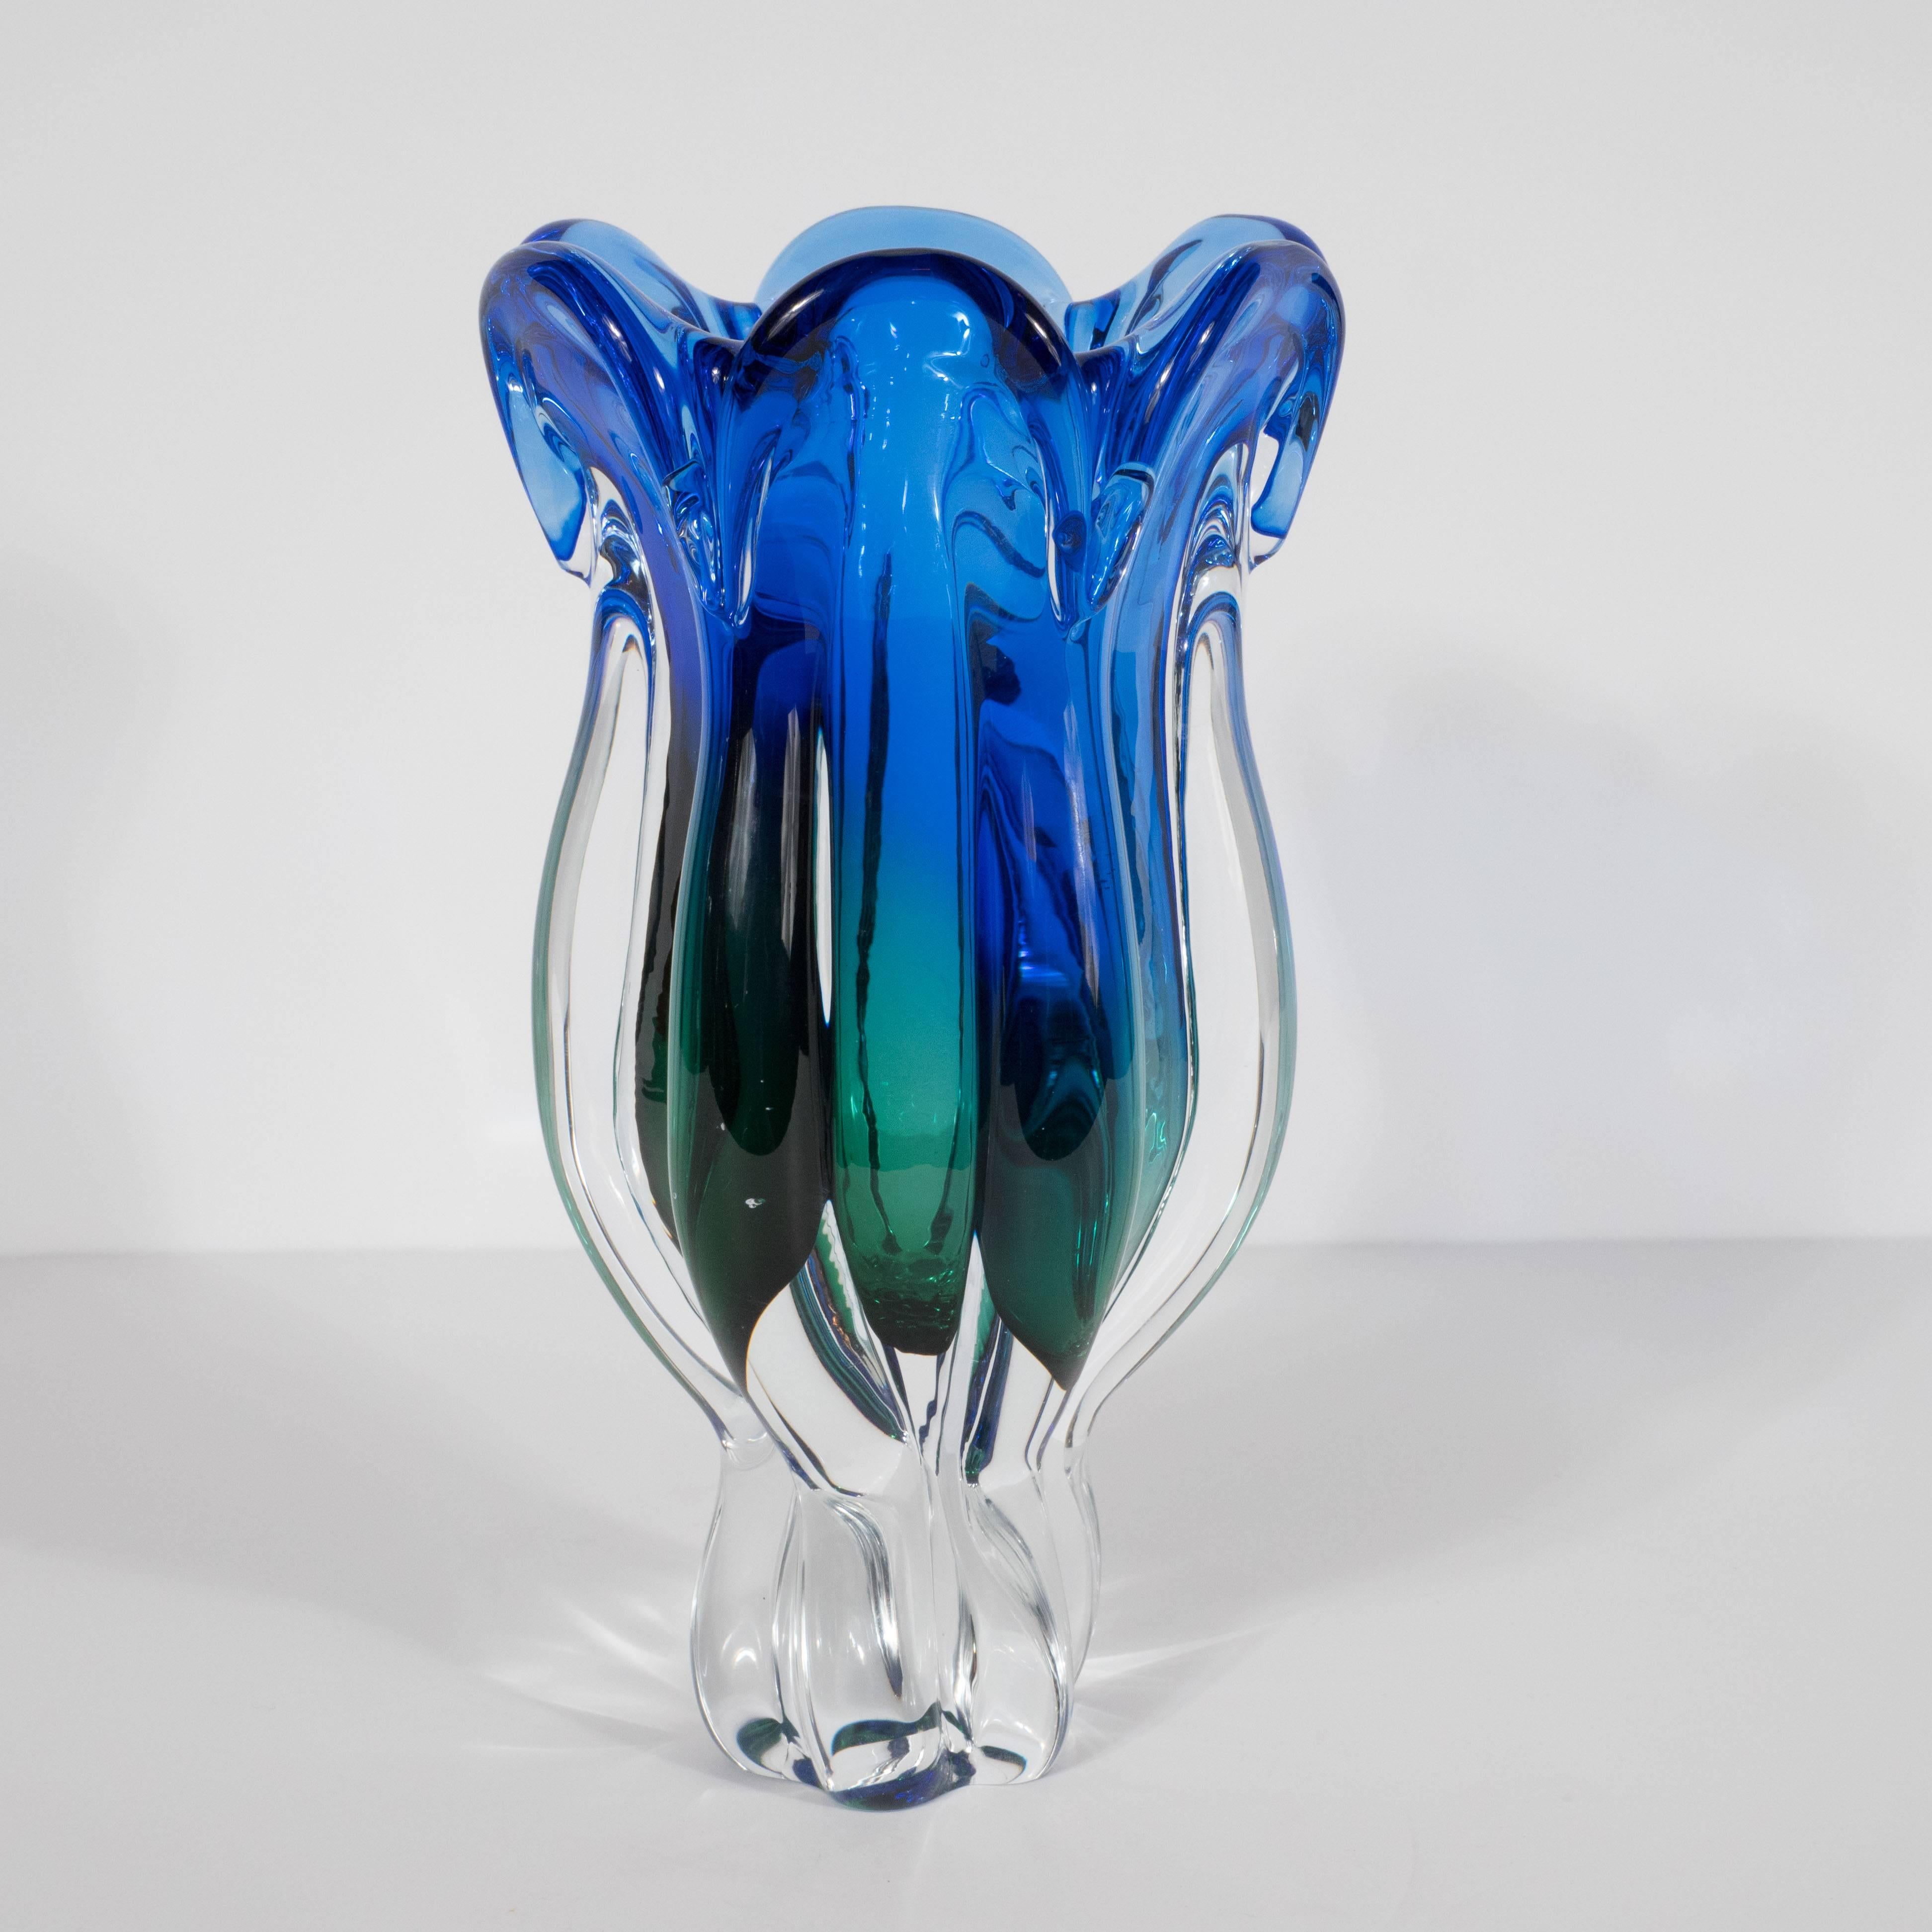 This exquisite Mid-Century Modern vase was realized in Murano, Italy, the Venetian islands renowned for their superlative quality glass production for centuries. It features a translucent glass base with raised and rounded seams undulating along the